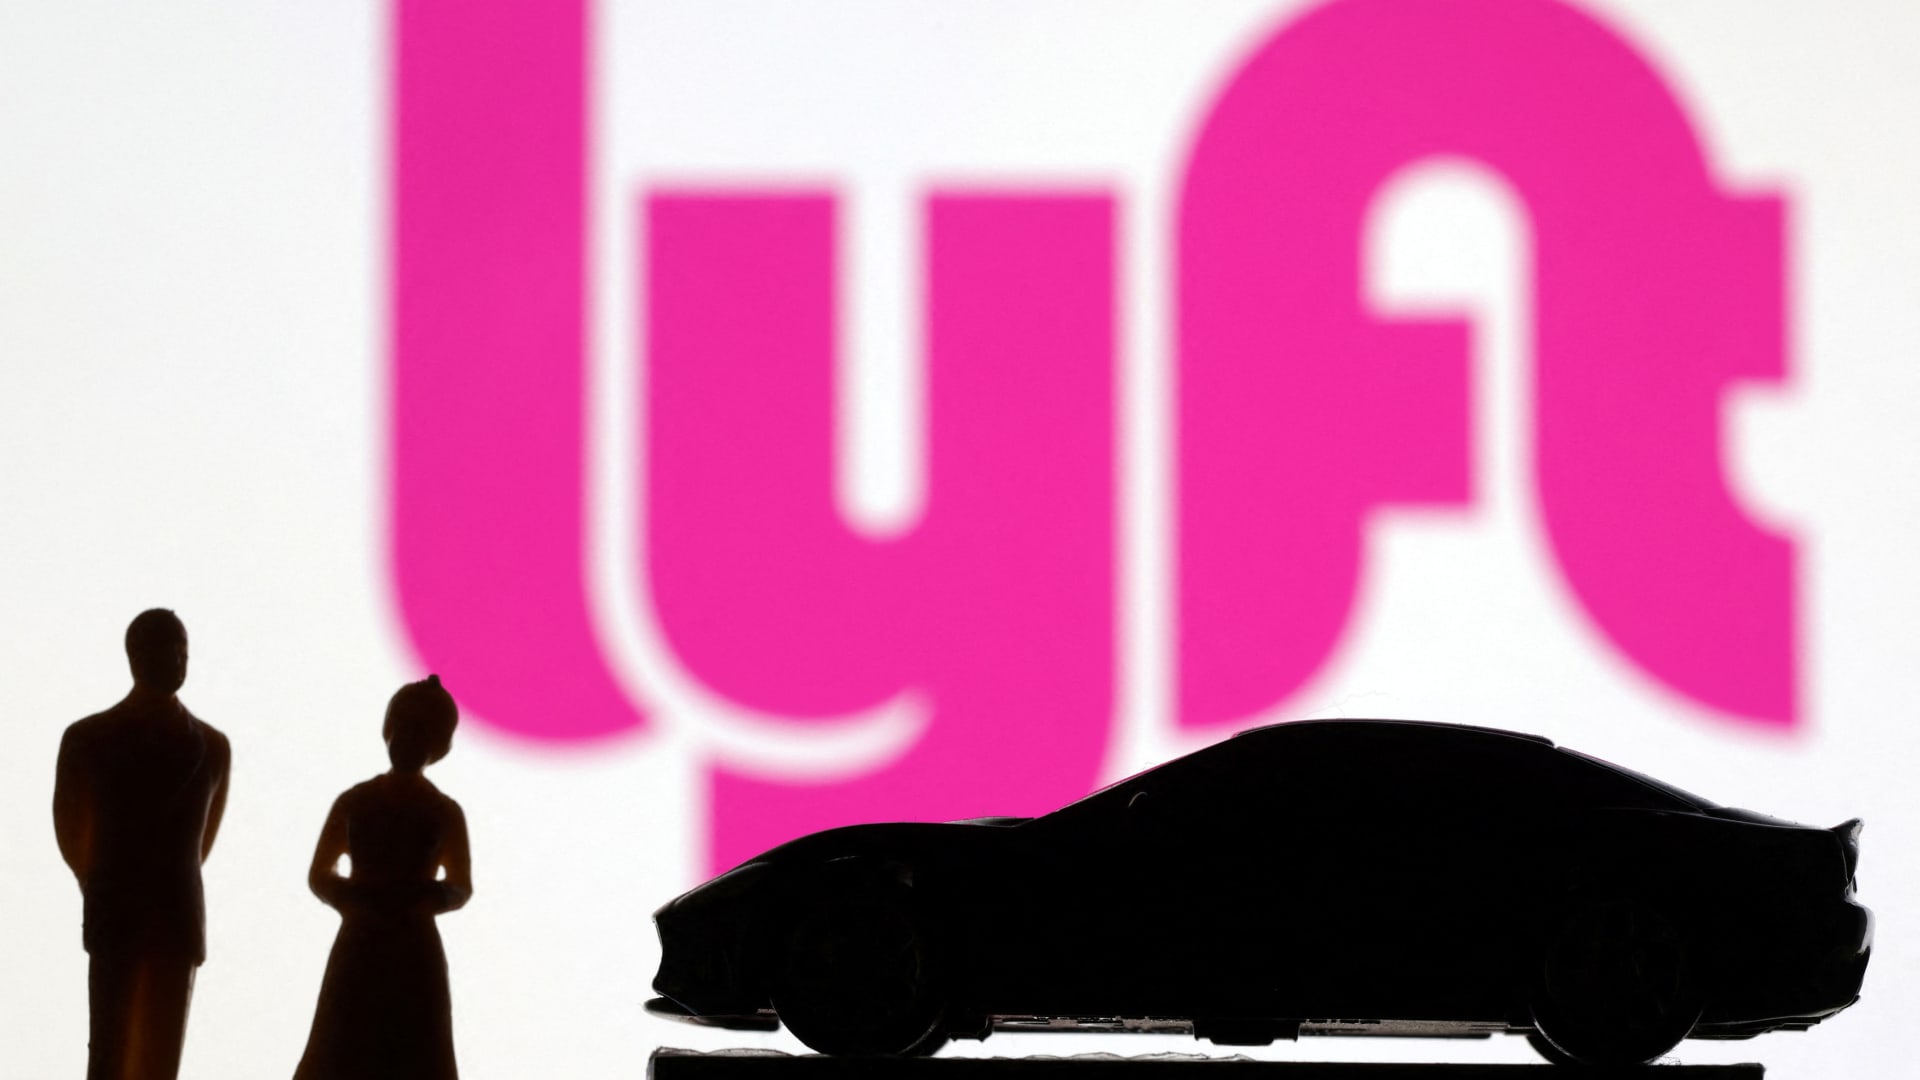 Lyft CEO takes blame for 'extra zero' in Q4 earnings release